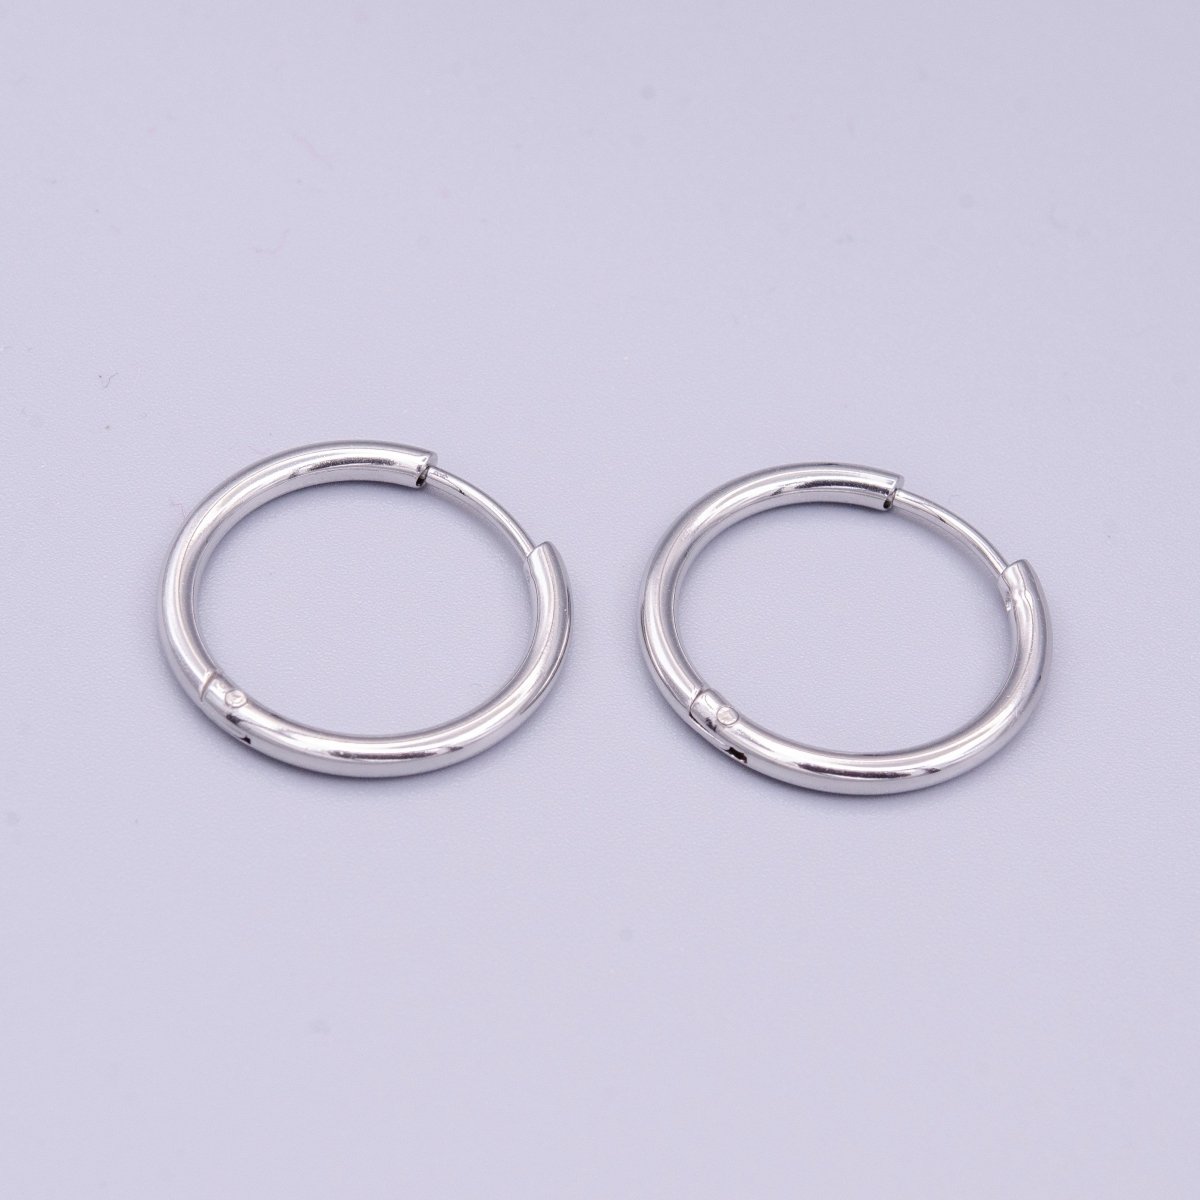 White Gold Filled 11mm, 13mm, 15mm, 17mm, 19mm, 21mm, 23mm Silver Minimalist Huggie Endless Hoop Earrings | AD1536 - AD1542 - DLUXCA